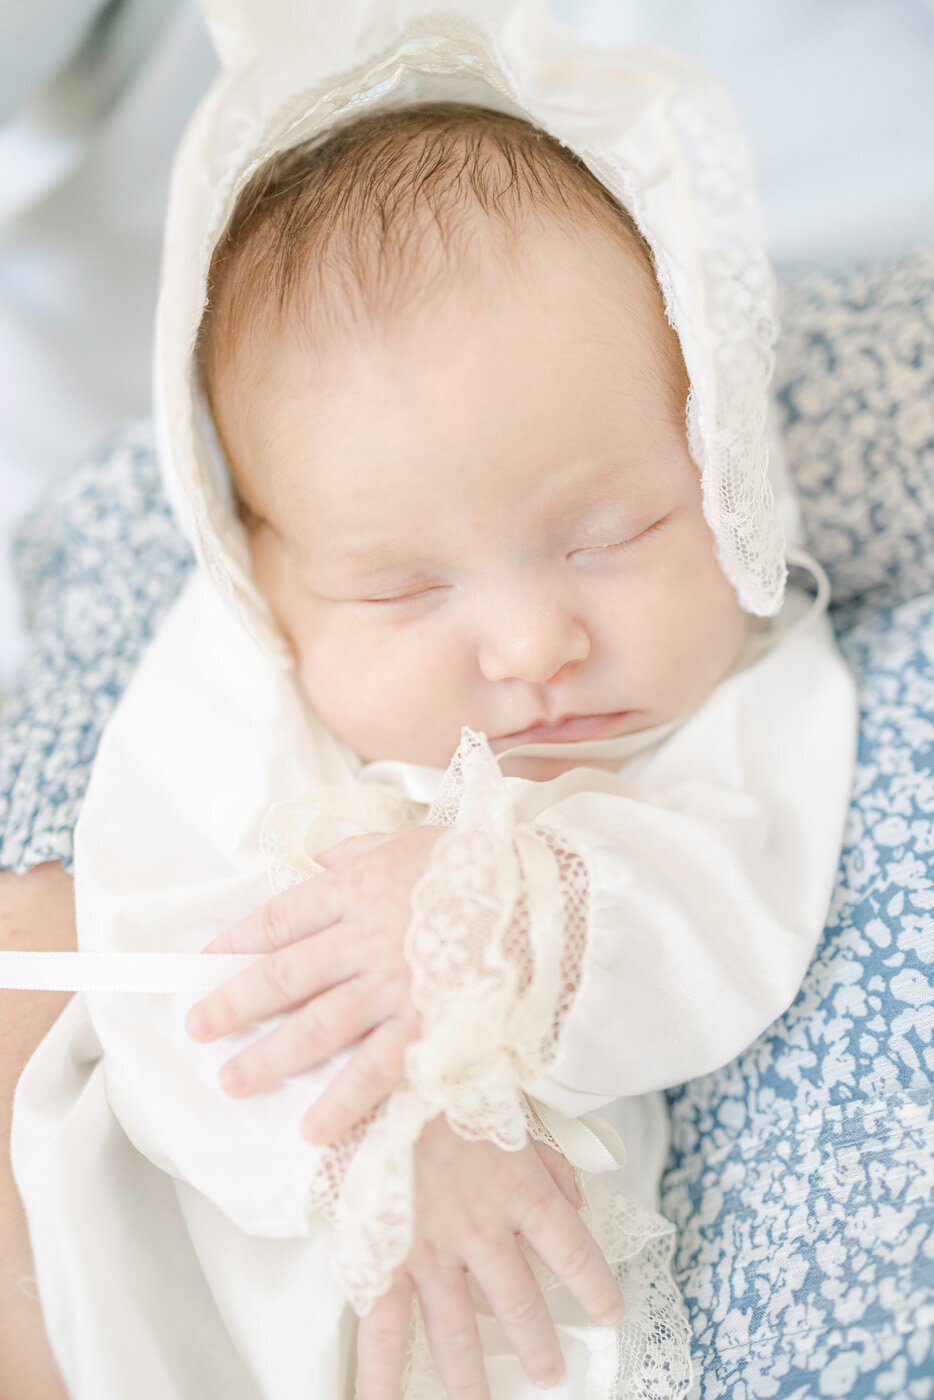 Newborn baby in heirloom daygown and bonnet sleeping in her mother's arms